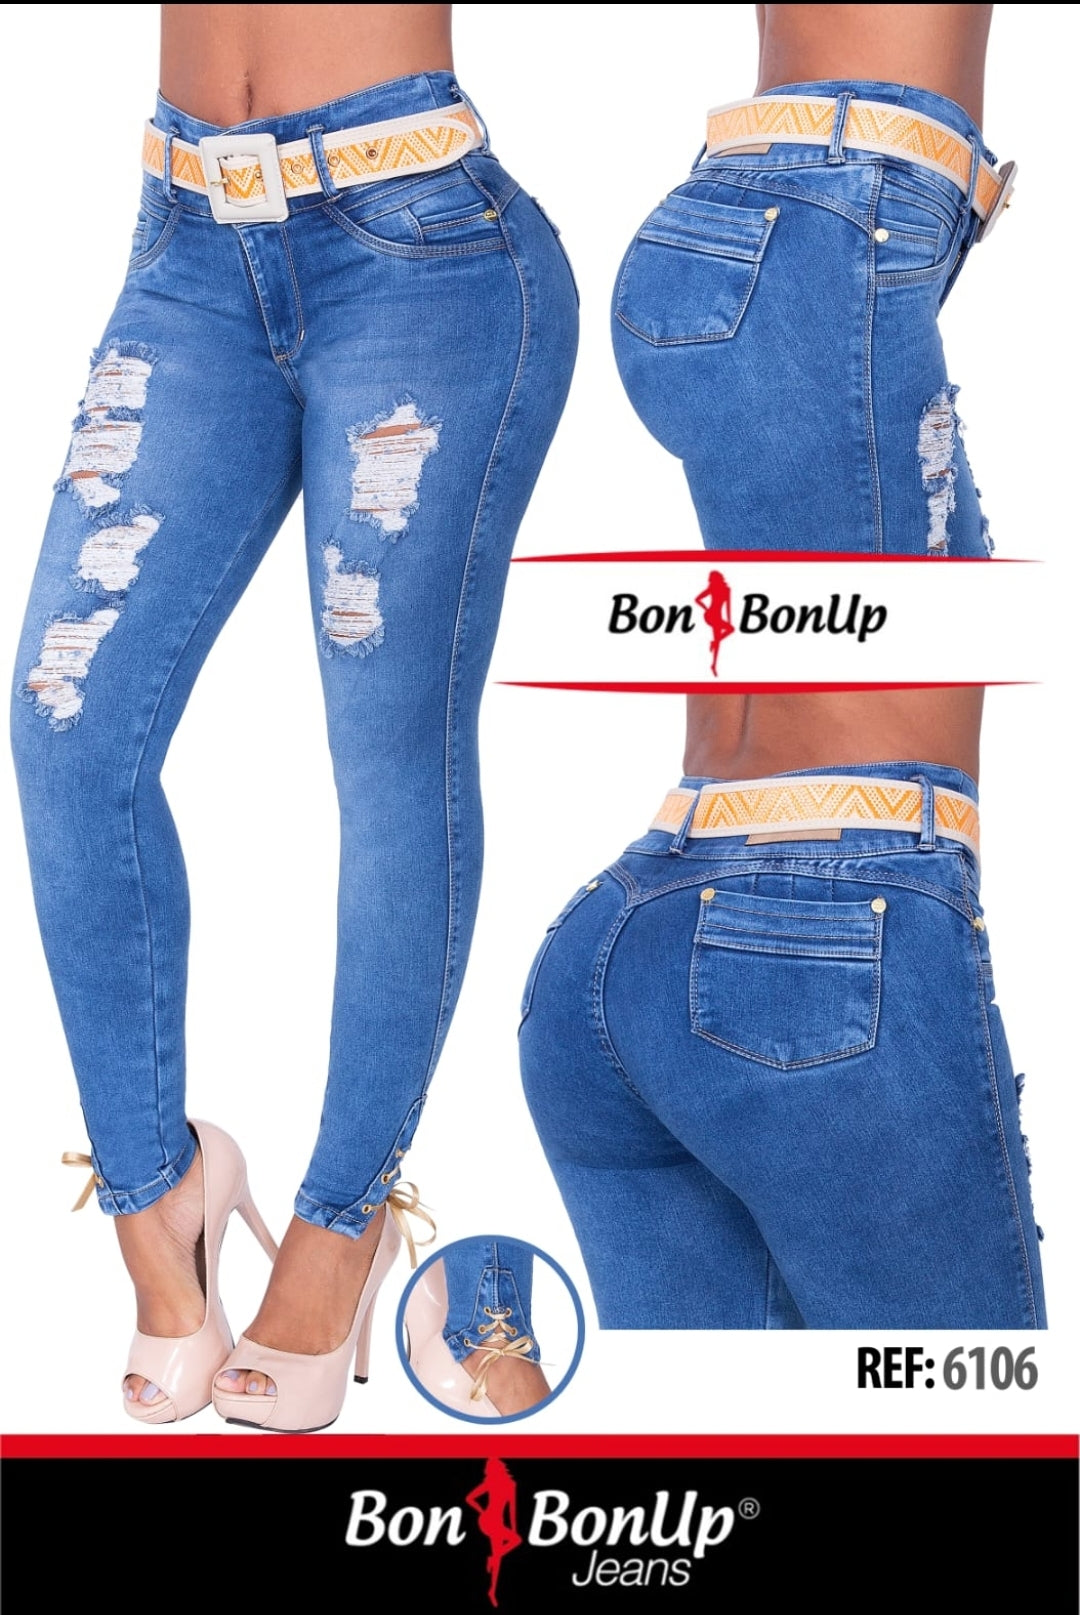 colombiana, Jeans, Colombian Buttlift Jeans